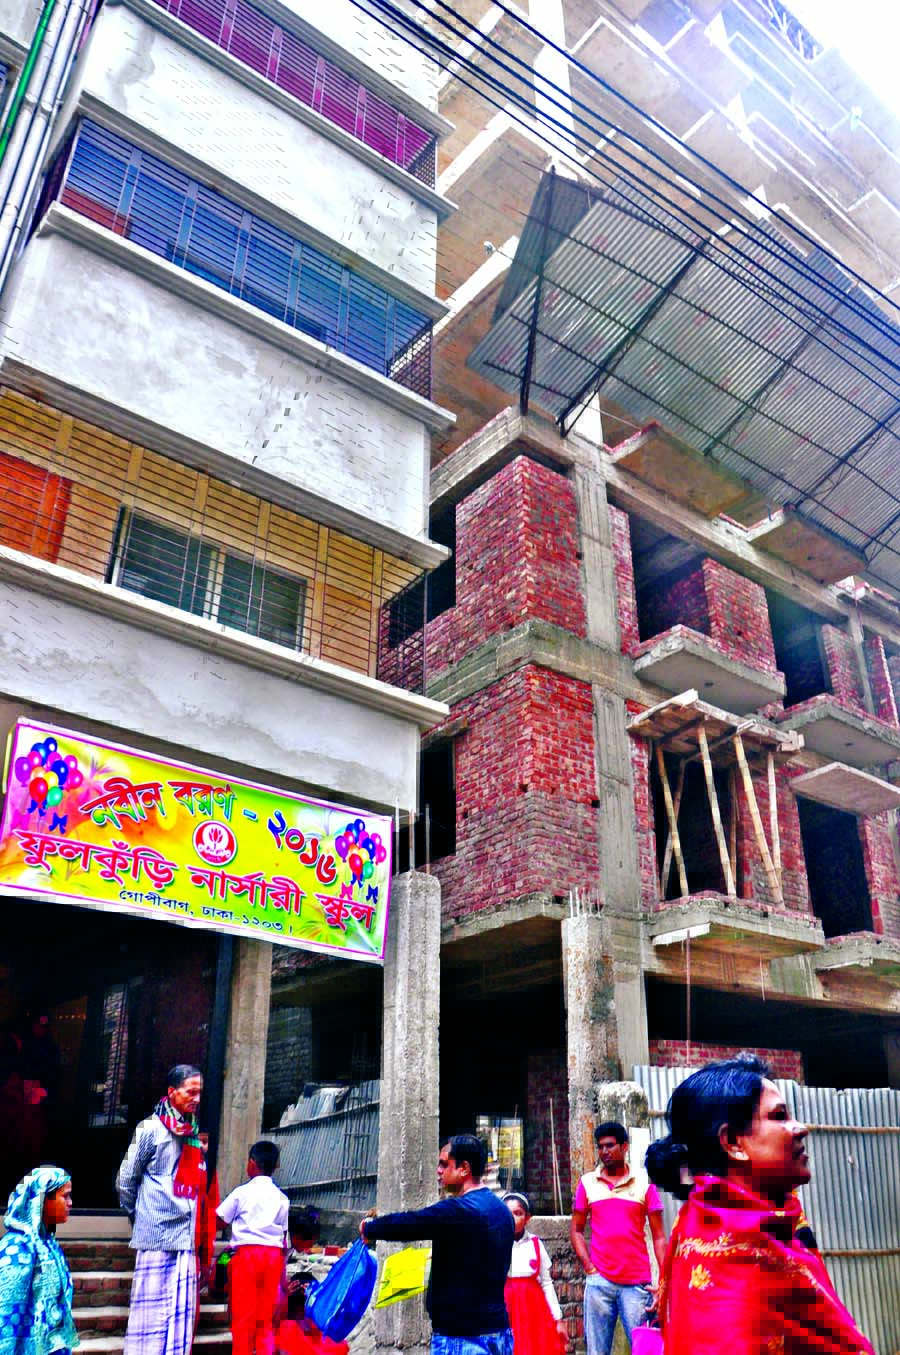 Insufficient precautionary measures in under construction buildings in the city may cause serious threat to the life of pedestrians any time. This photo was taken yesterday from in front of 'Fulkuri Nursery School' running in the ground floor of a house